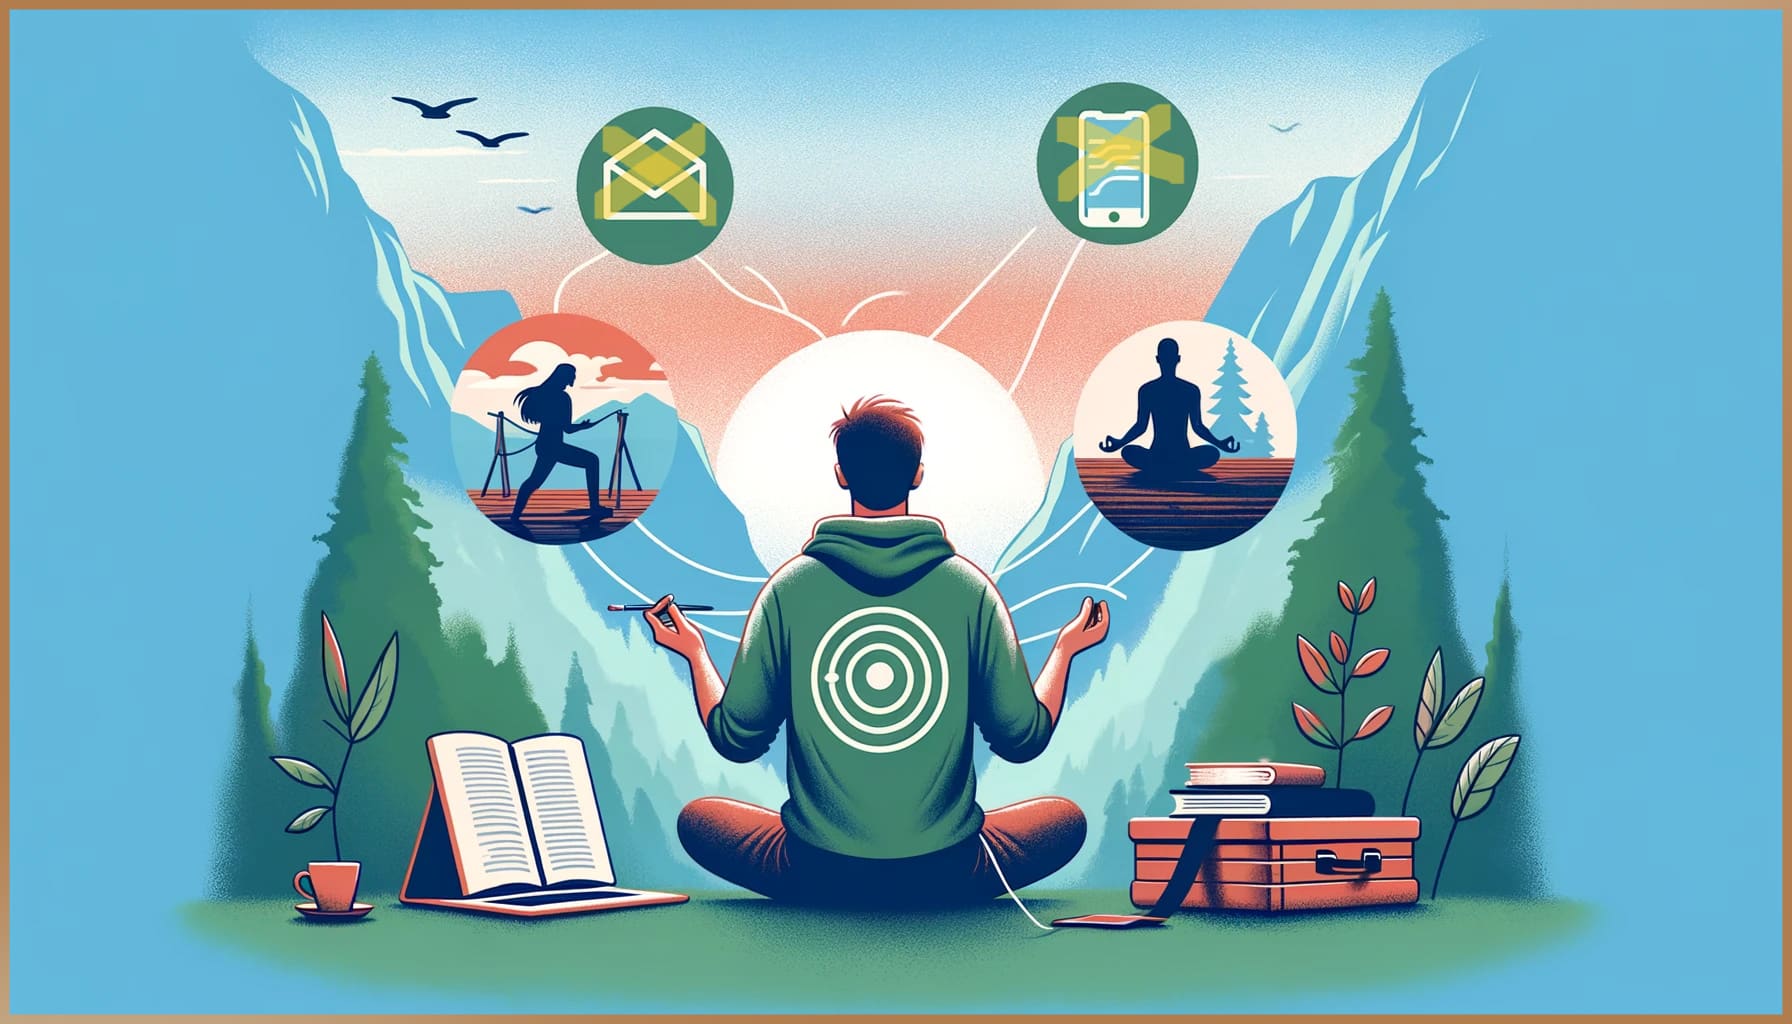 A person meditating in nature, surrounded by icons of traditional self-care activities, emphasizing digital detox.